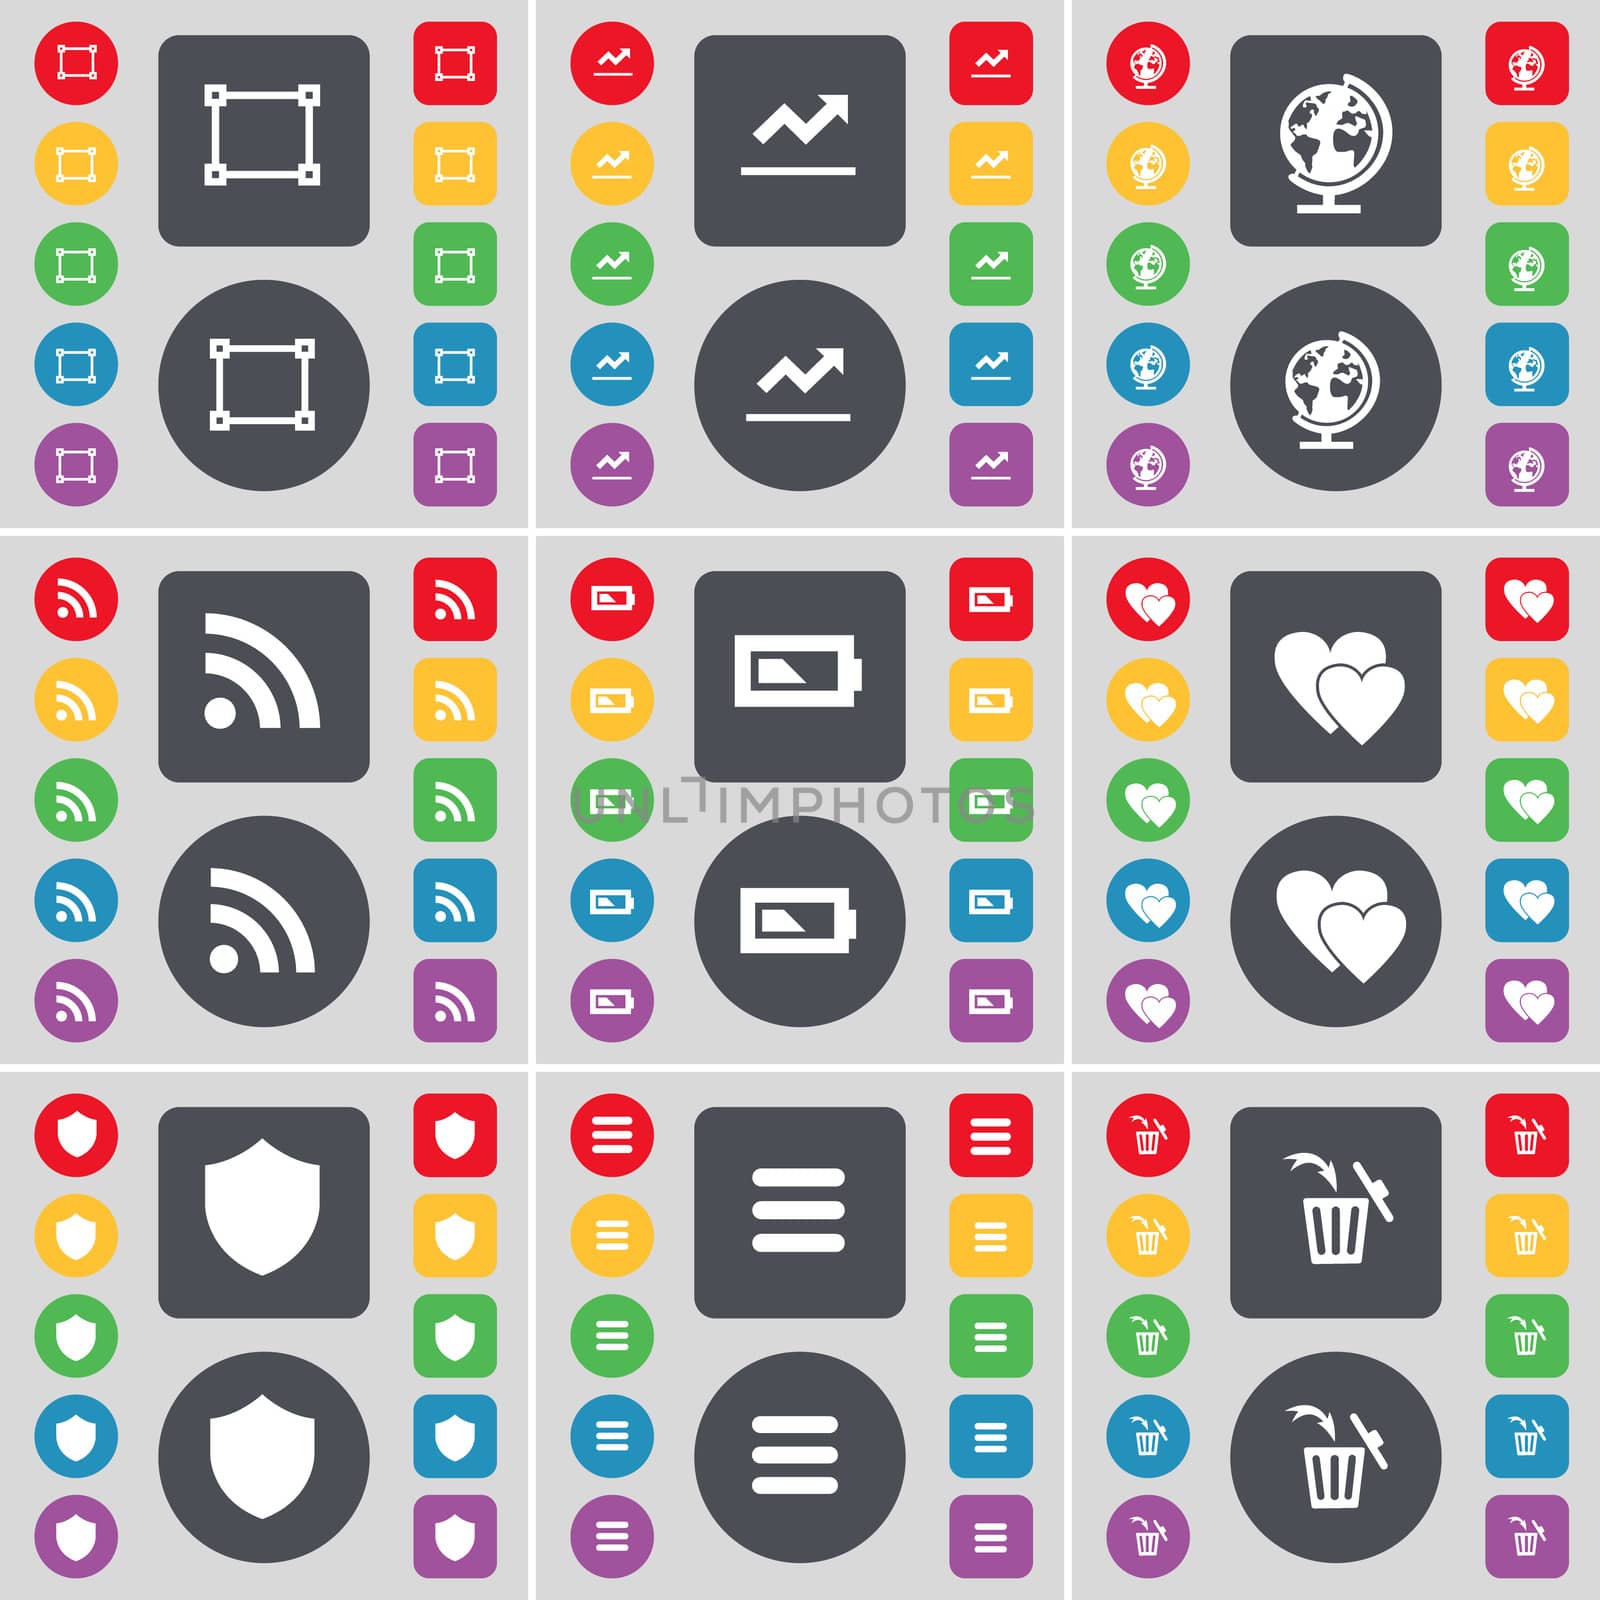 Frame, Graph, Globe, RSS, Battery, Heart, Badge, Apps, Trash can icon symbol. A large set of flat, colored buttons for your design. illustration